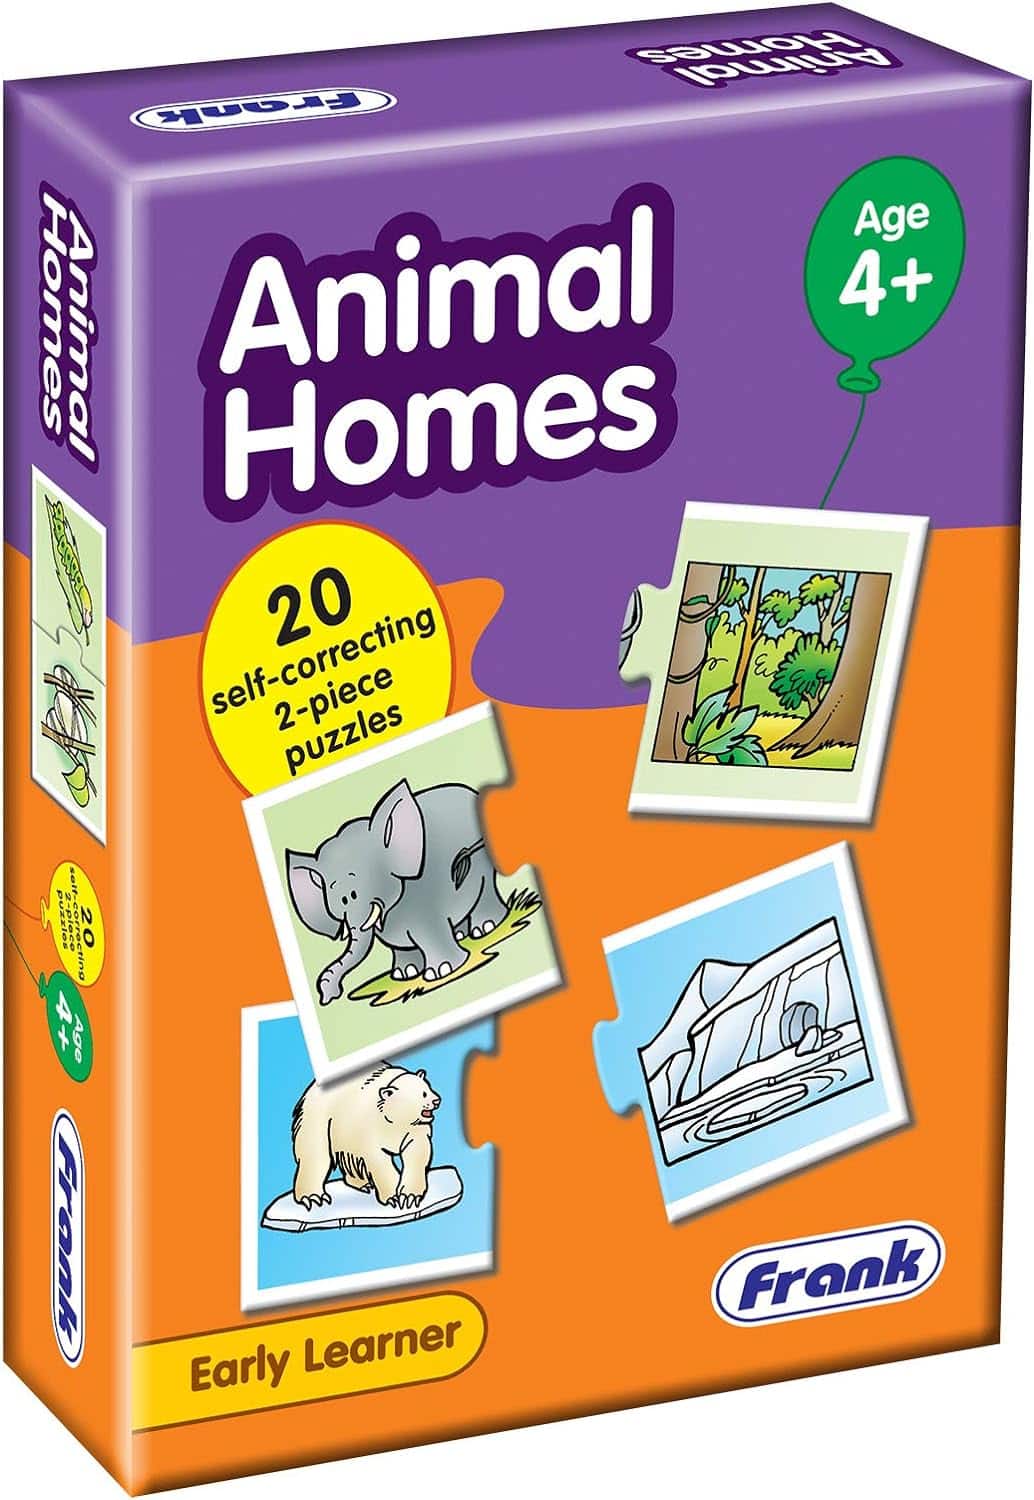 Frank Animal Homes Puzzle – A Fun and Educational Jigsaw Puzzle for Early Learners